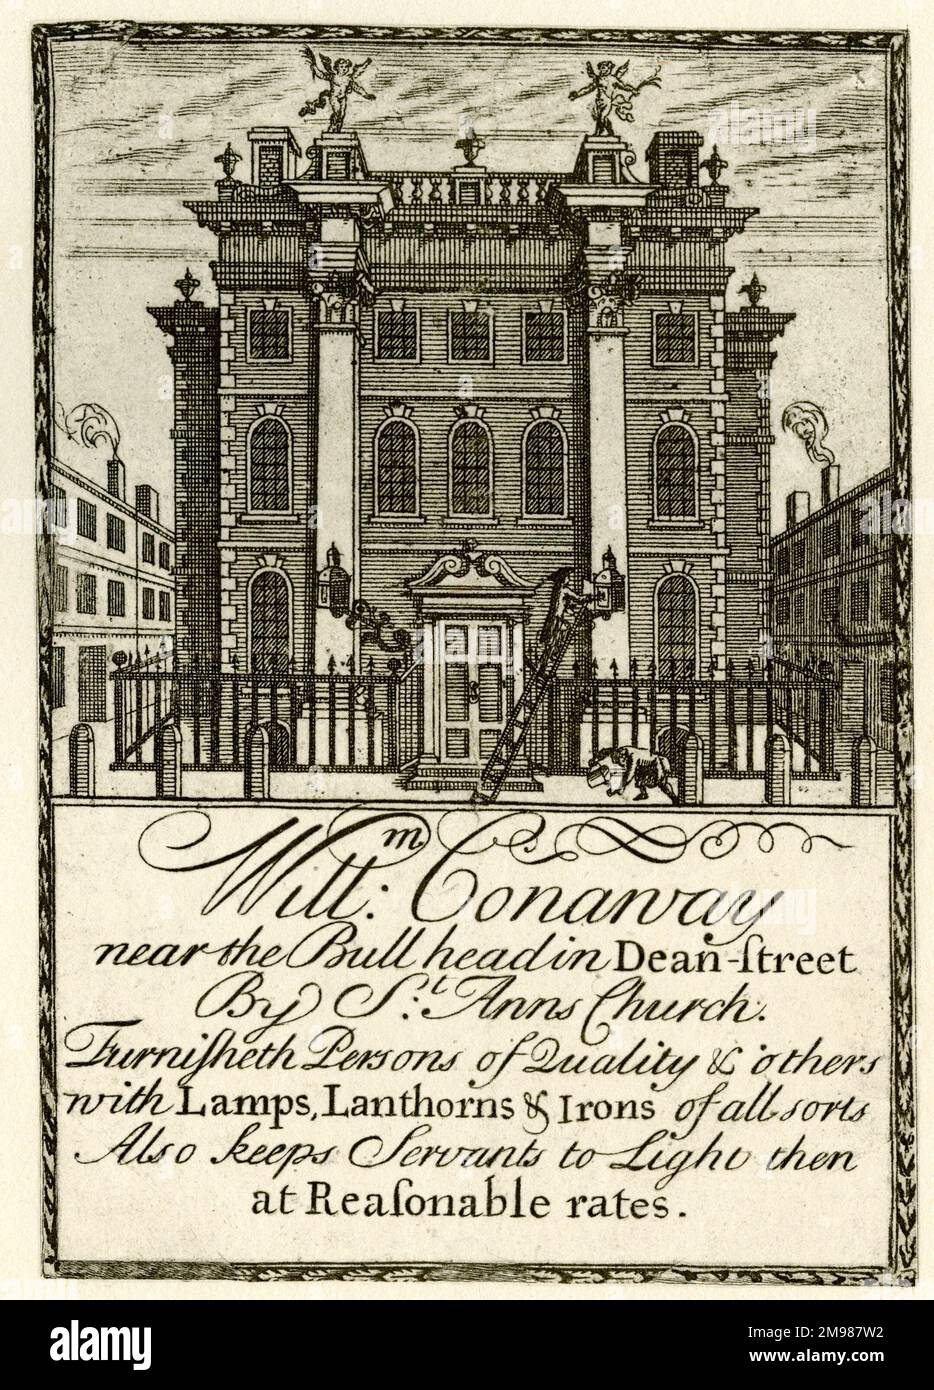 London Trade Card - William Conaway, near the Bull Head in Dean Street, by St Ann's Church, selling lamps, lanterns and irons, and servants to light them. Stock Photo